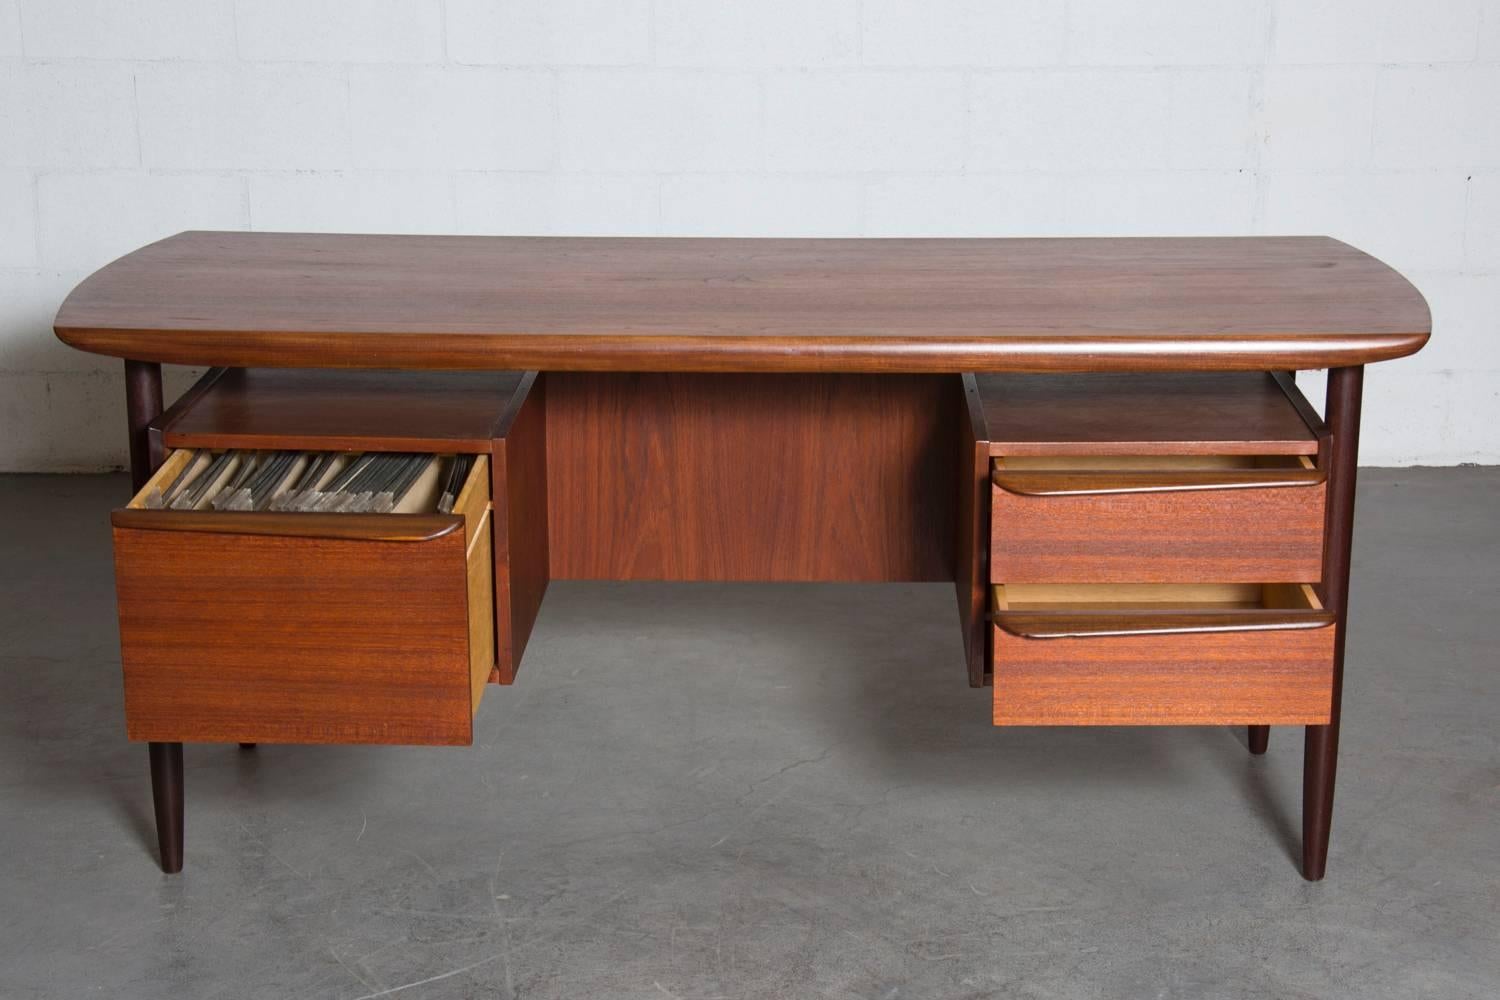 Beautiful dark teak desk with organic drawer pulls, floating top, exposed bookcase, and one large filing drawer. In original condition, some chipping and wear consistent with age and use.
 